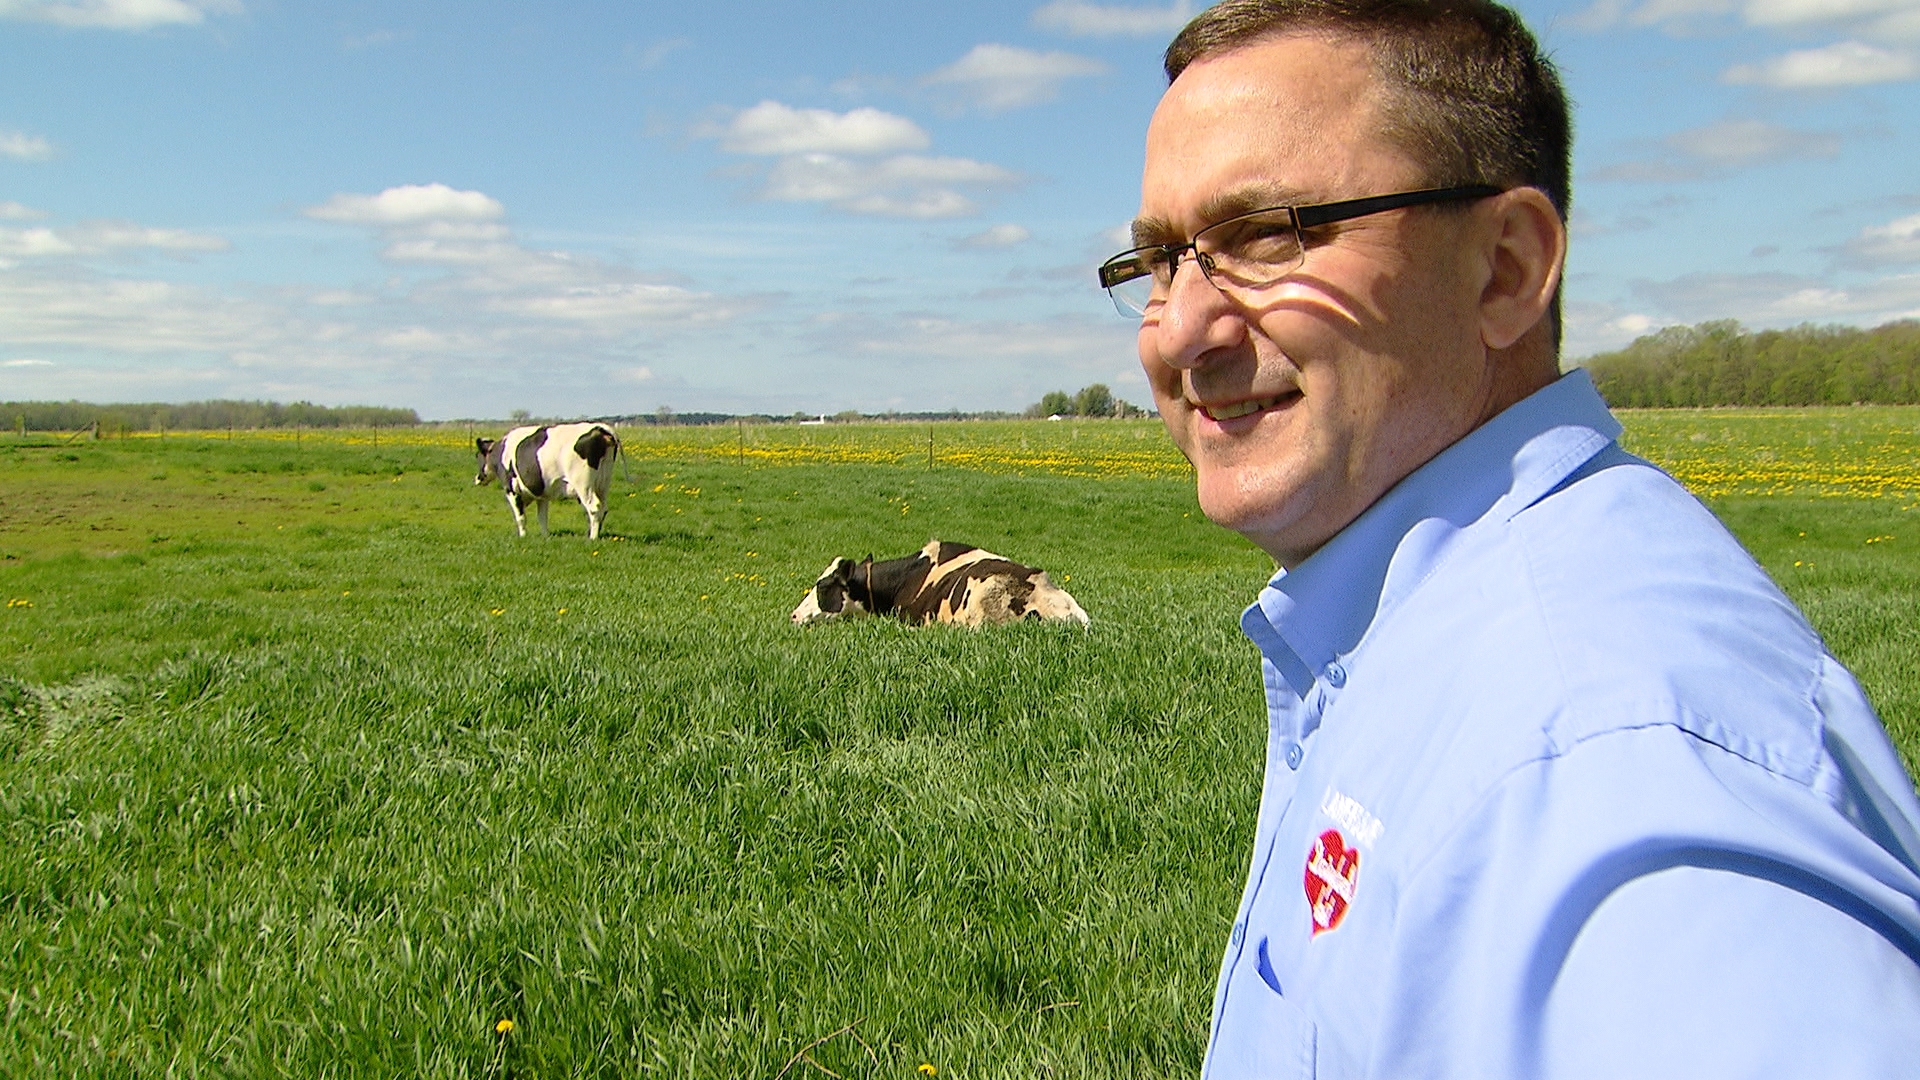 mark lamers, lamers dairy inc, dairylands best, appleton, wisconsin, family farms, fresh milk, dairy products, ecommerce store, taste the difference, store locator, fox valley web design, graphic design, custom wordpress websites, custom ecommerce websites, logo design, drone aerial photography, above wisconsin, final cut pro, video production, packerland, fox valley wi